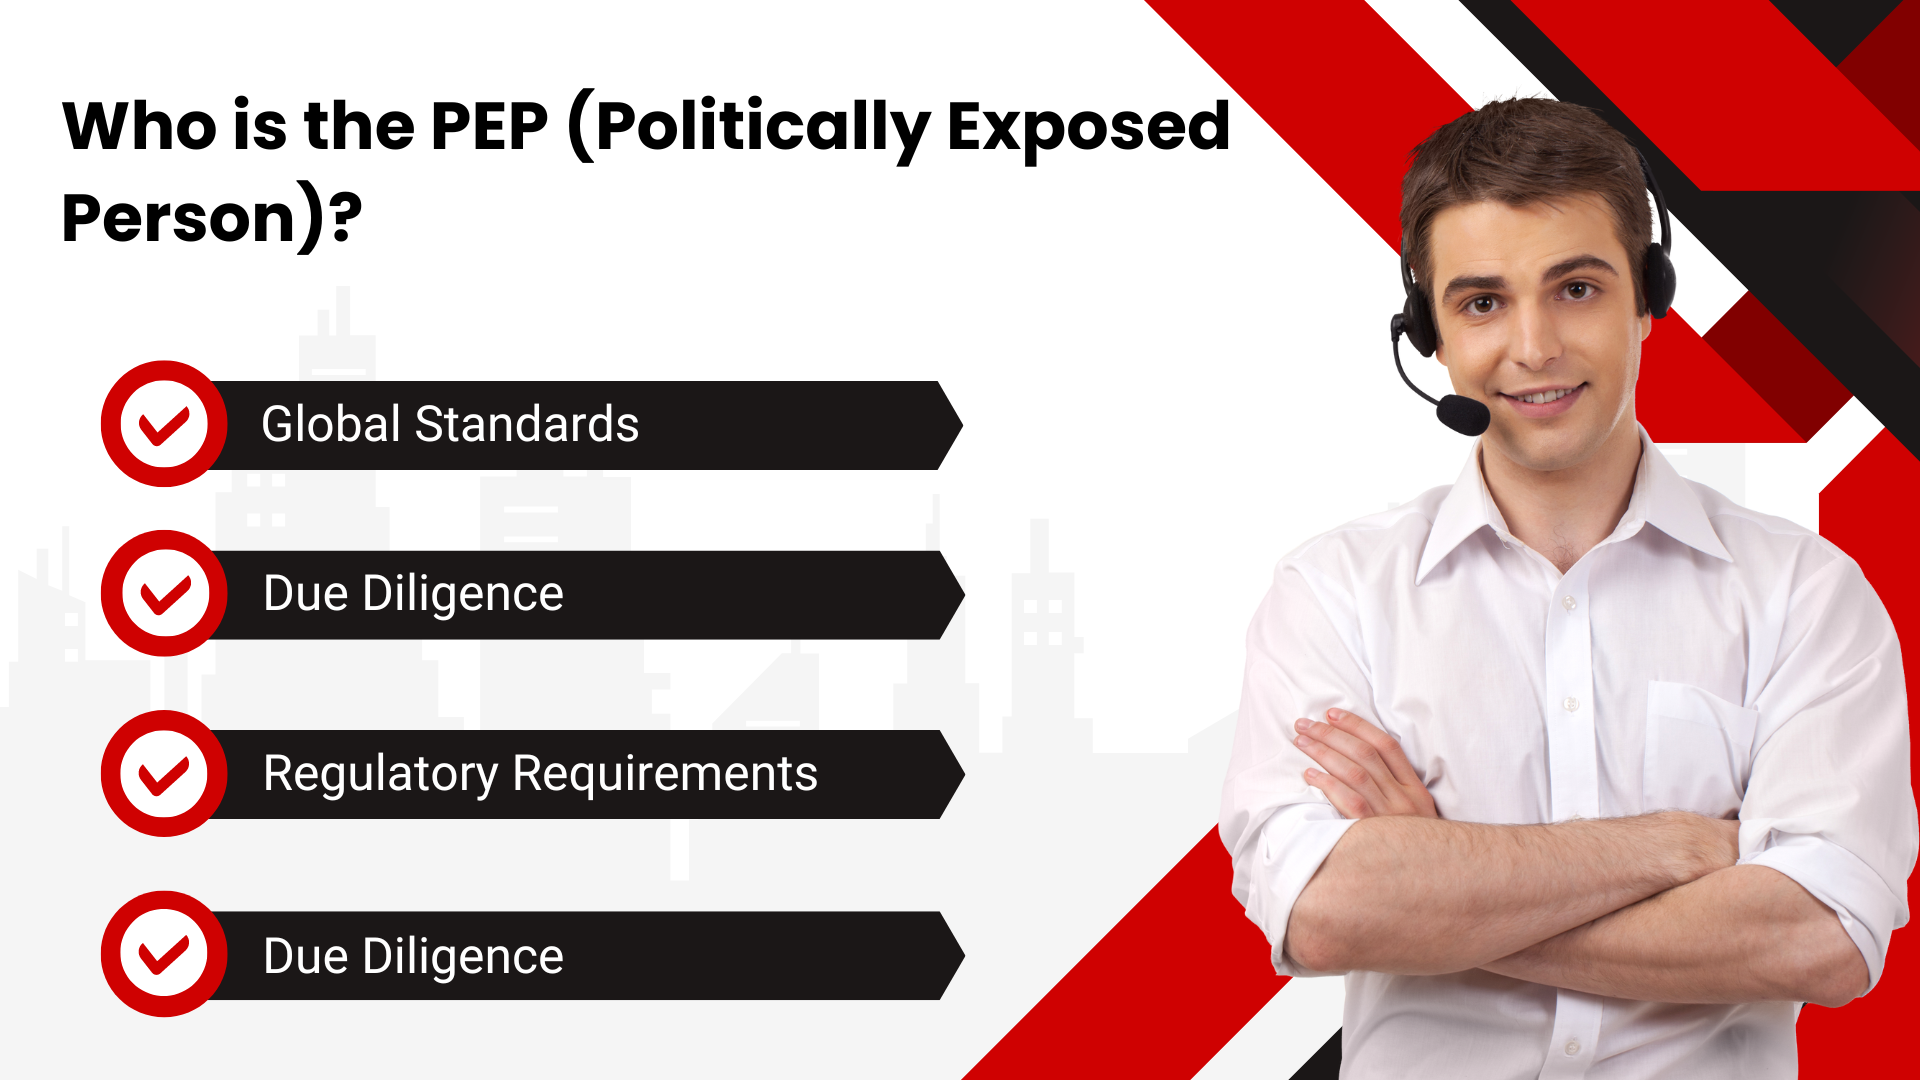 Politically Exposed Person